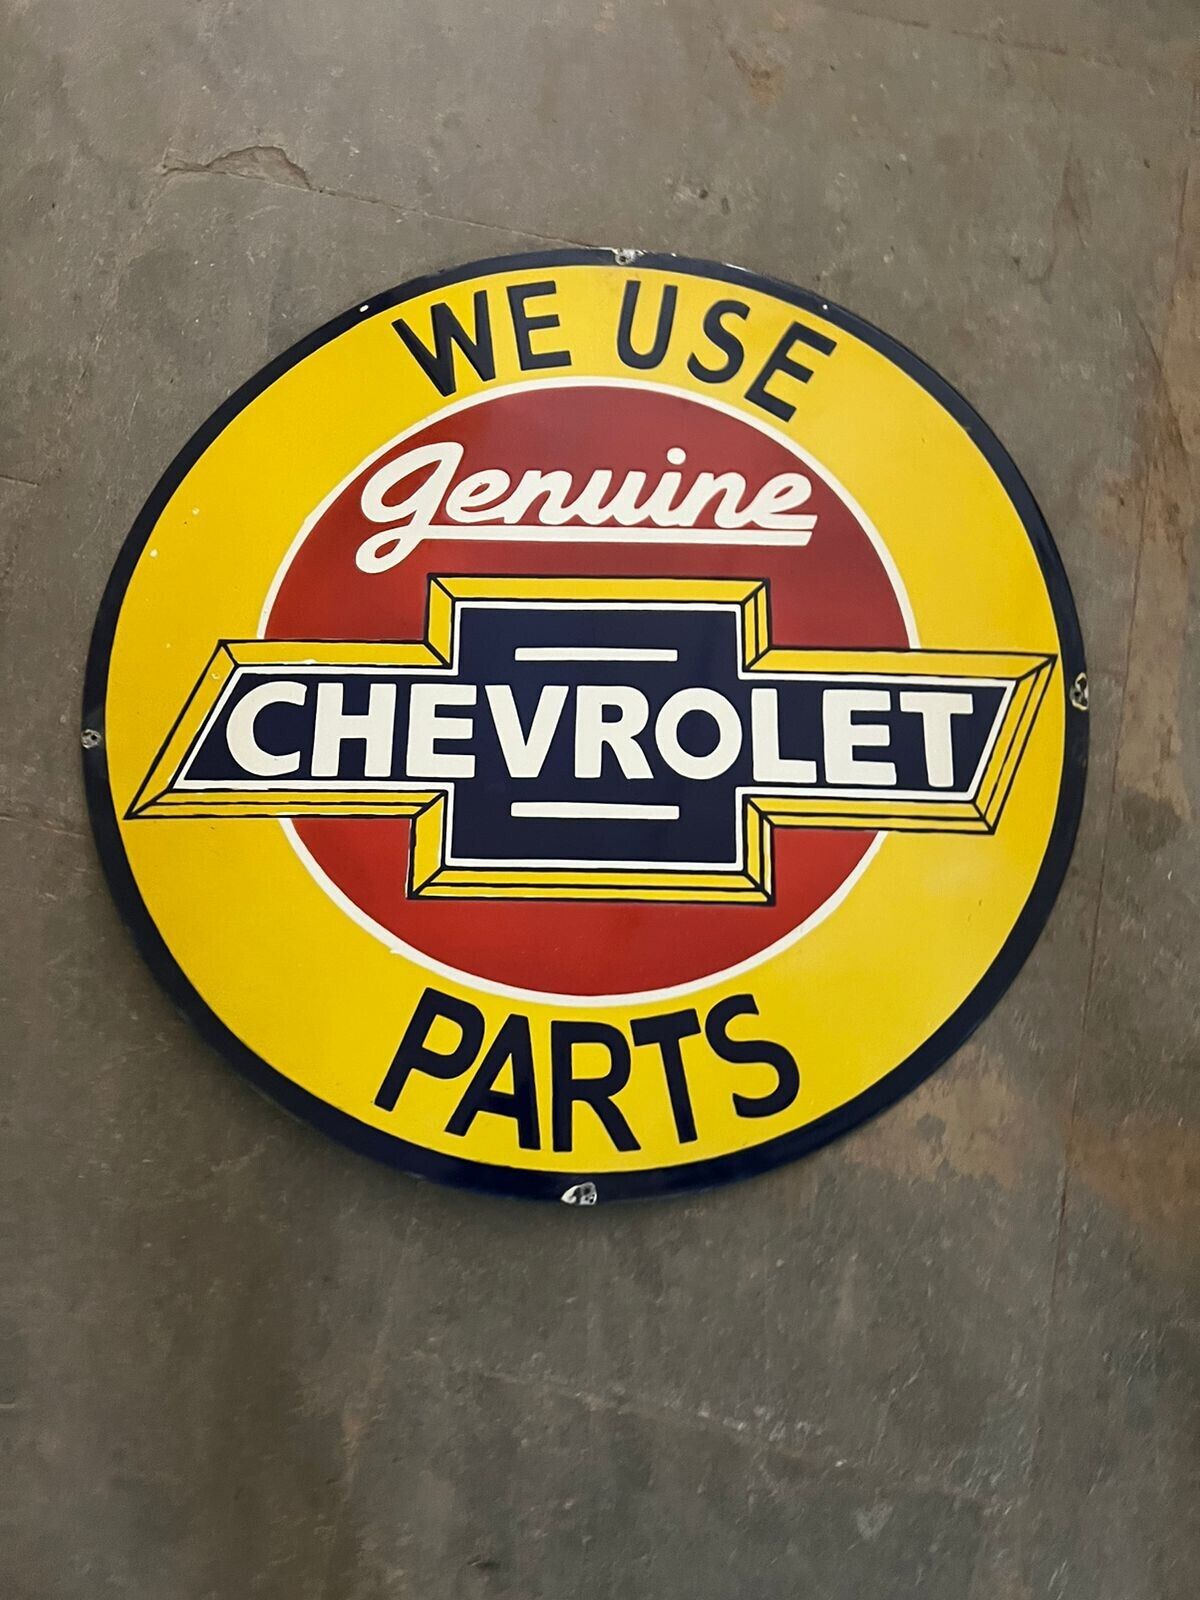 RARE PORCELAIN CHEVROLET ENAMEL SIGN 36X36 INCHES DOUBLE SIDED